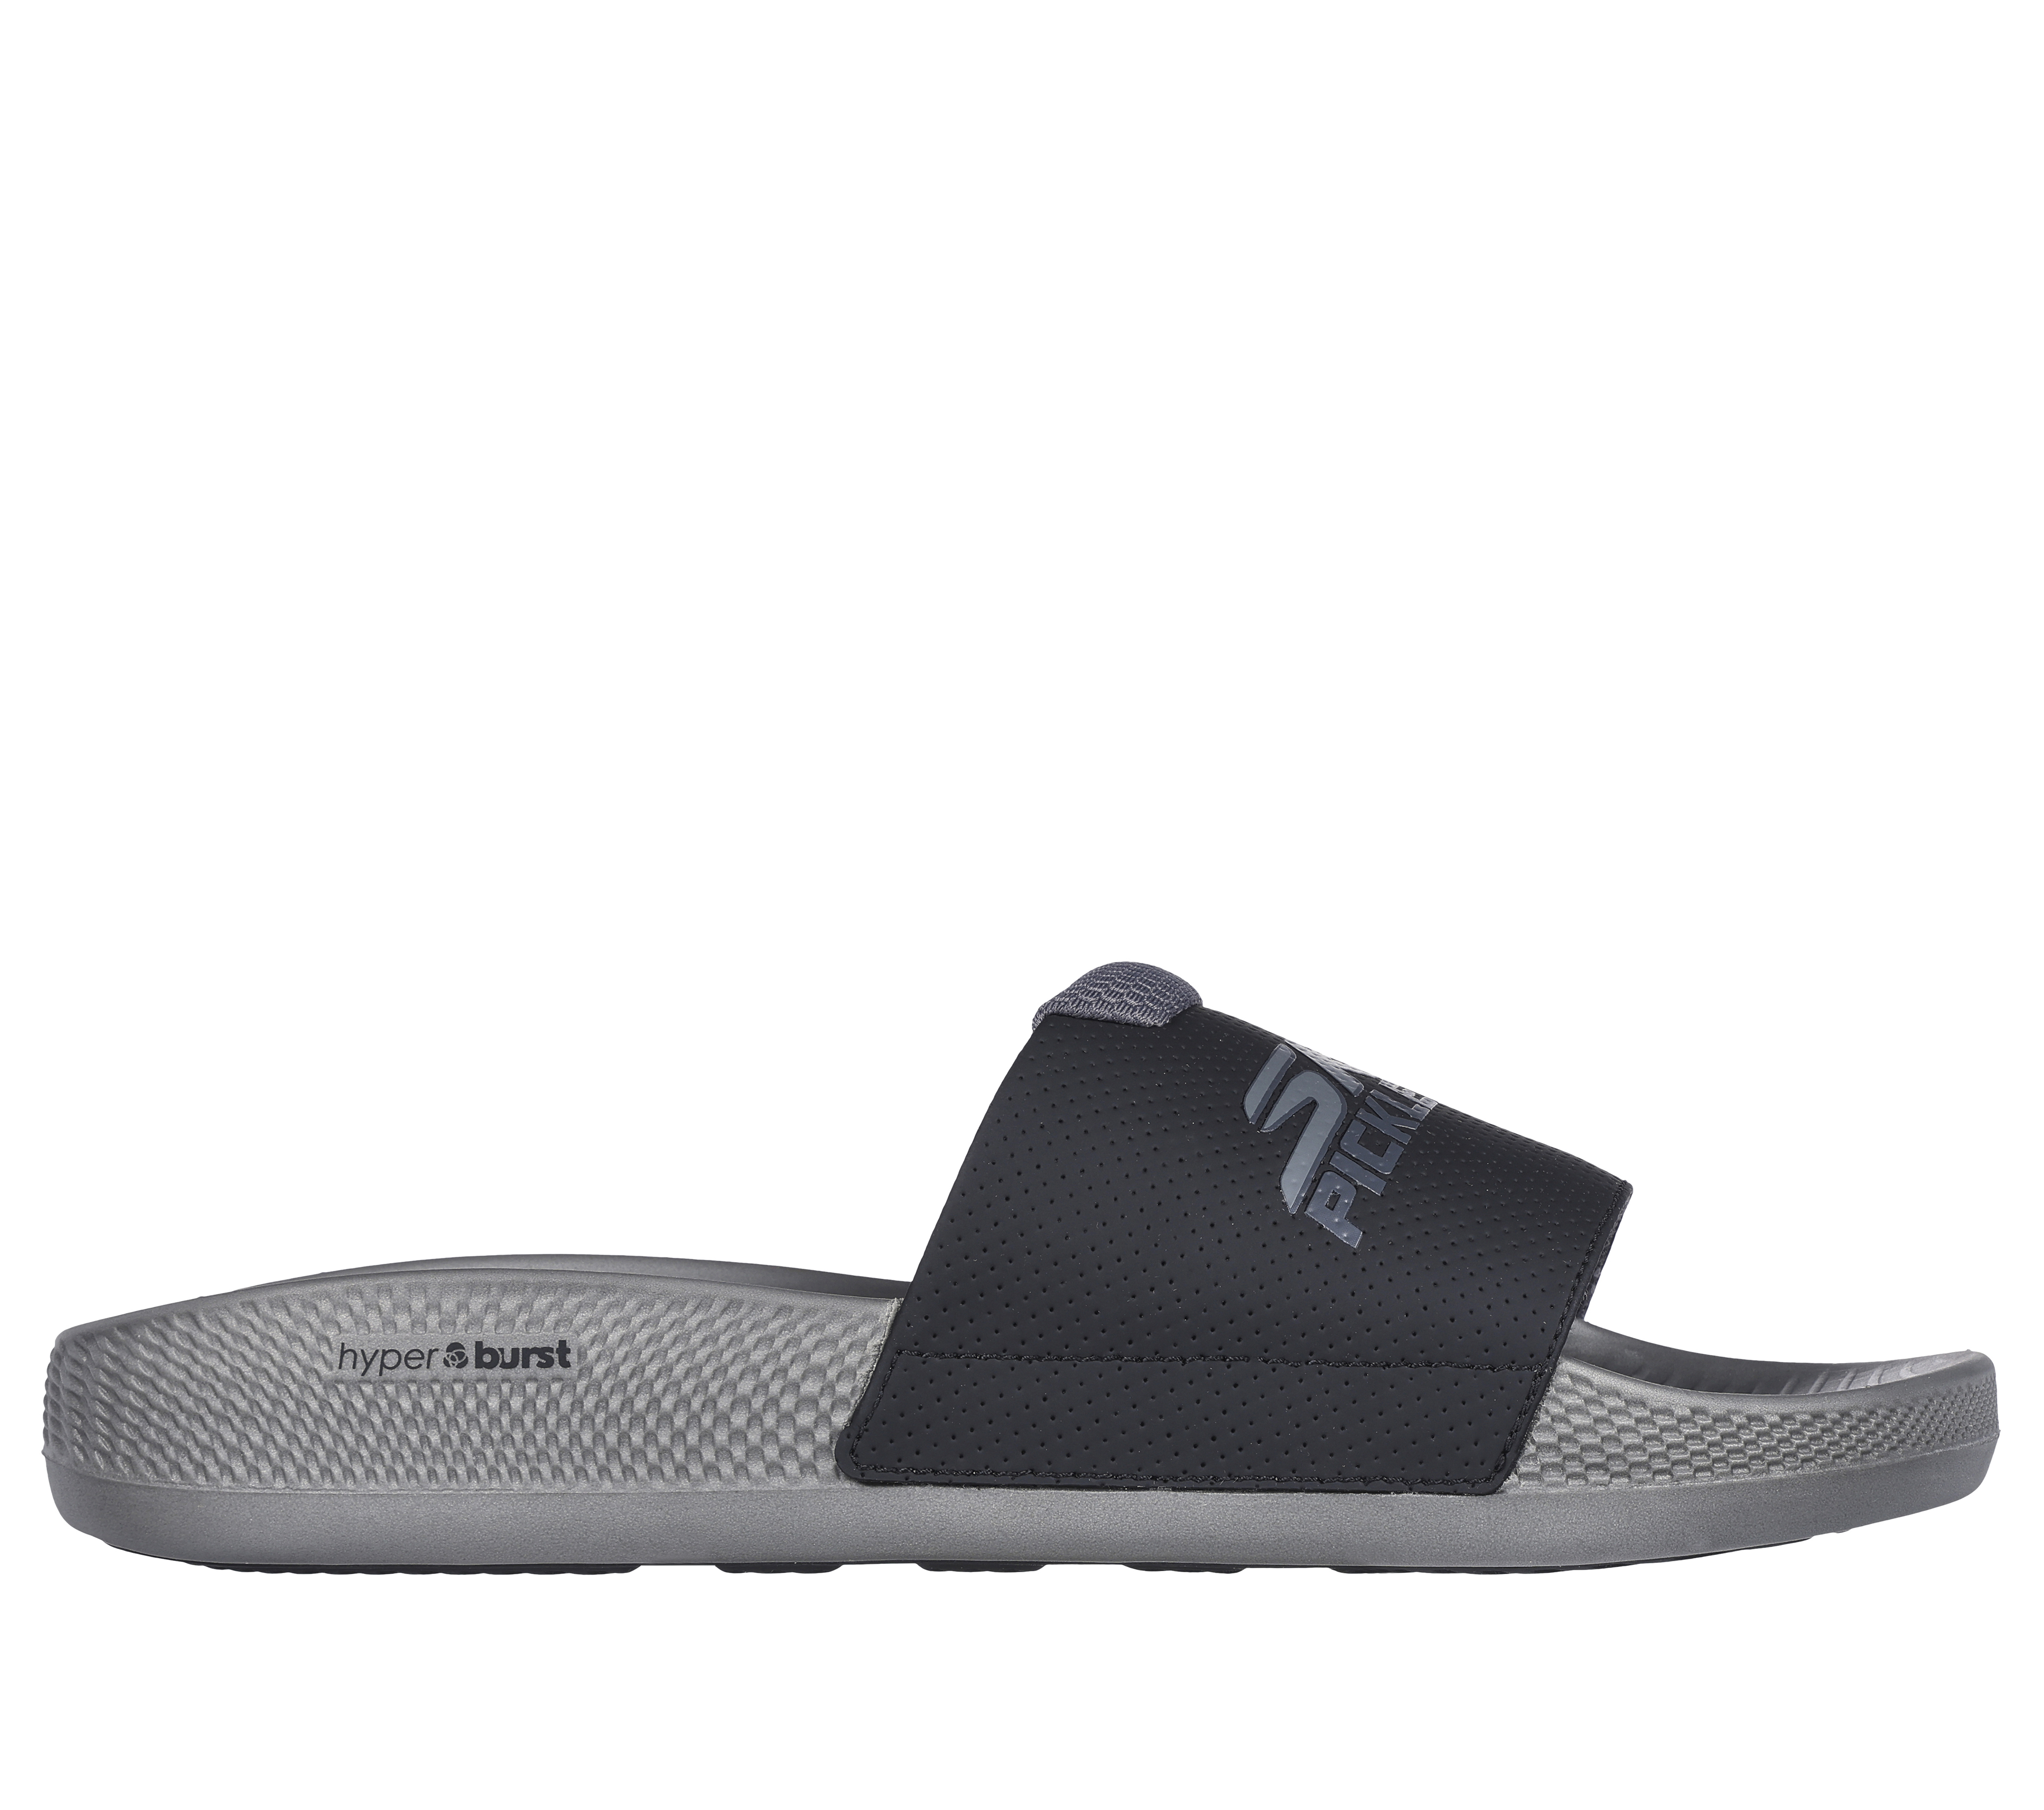 Give yourself the post-run recovery you deserve with Skechers Hyper Slide  sandals — Featuring a HYPER BURST®️ cushioned midsole and